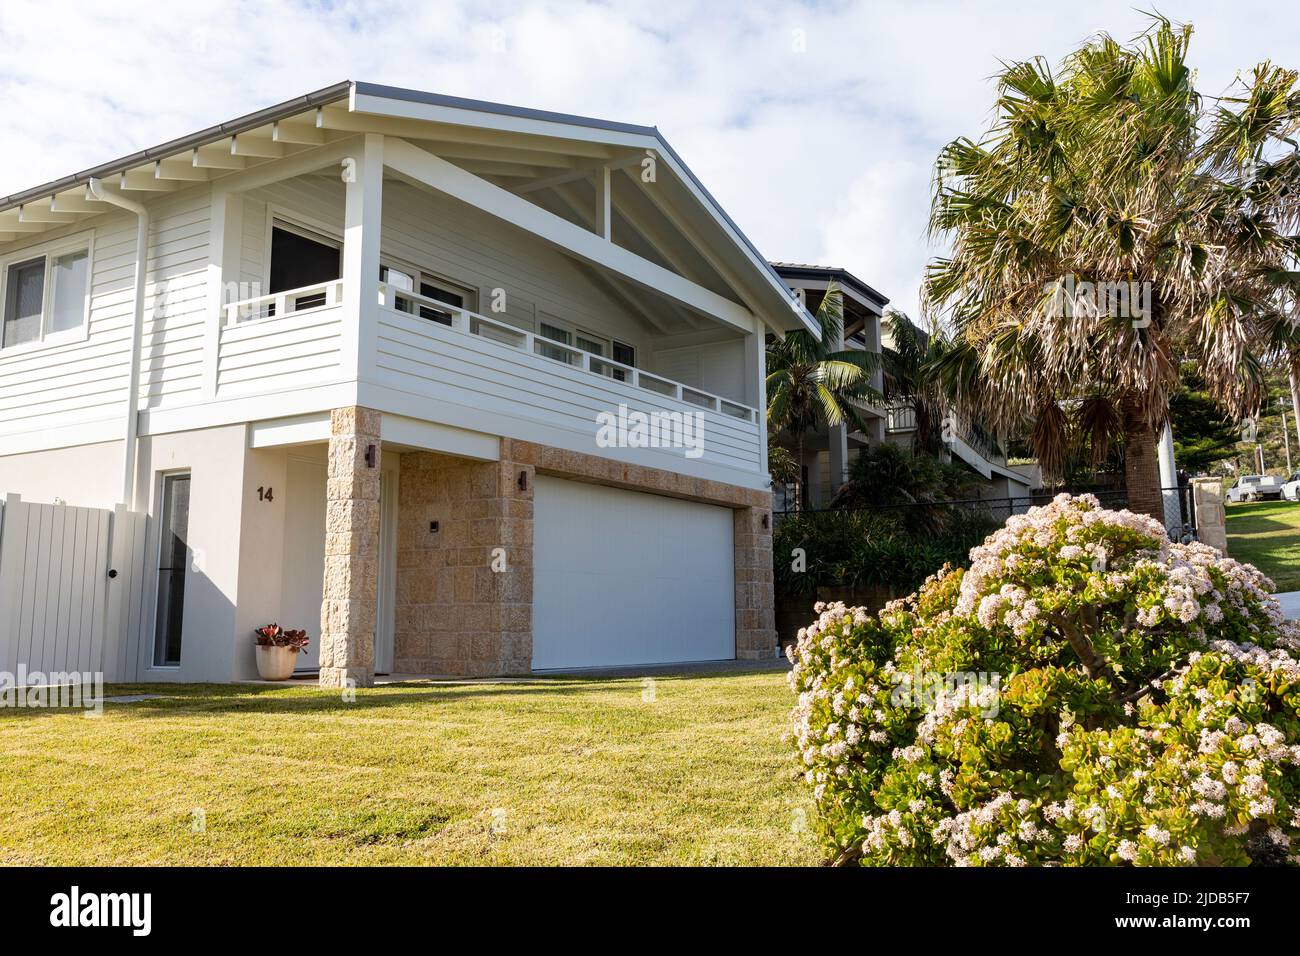 Detached Sydney home in Avalon Beach suburb, with large garden and lawn,Sydney,NSW,Australia Stock Photo